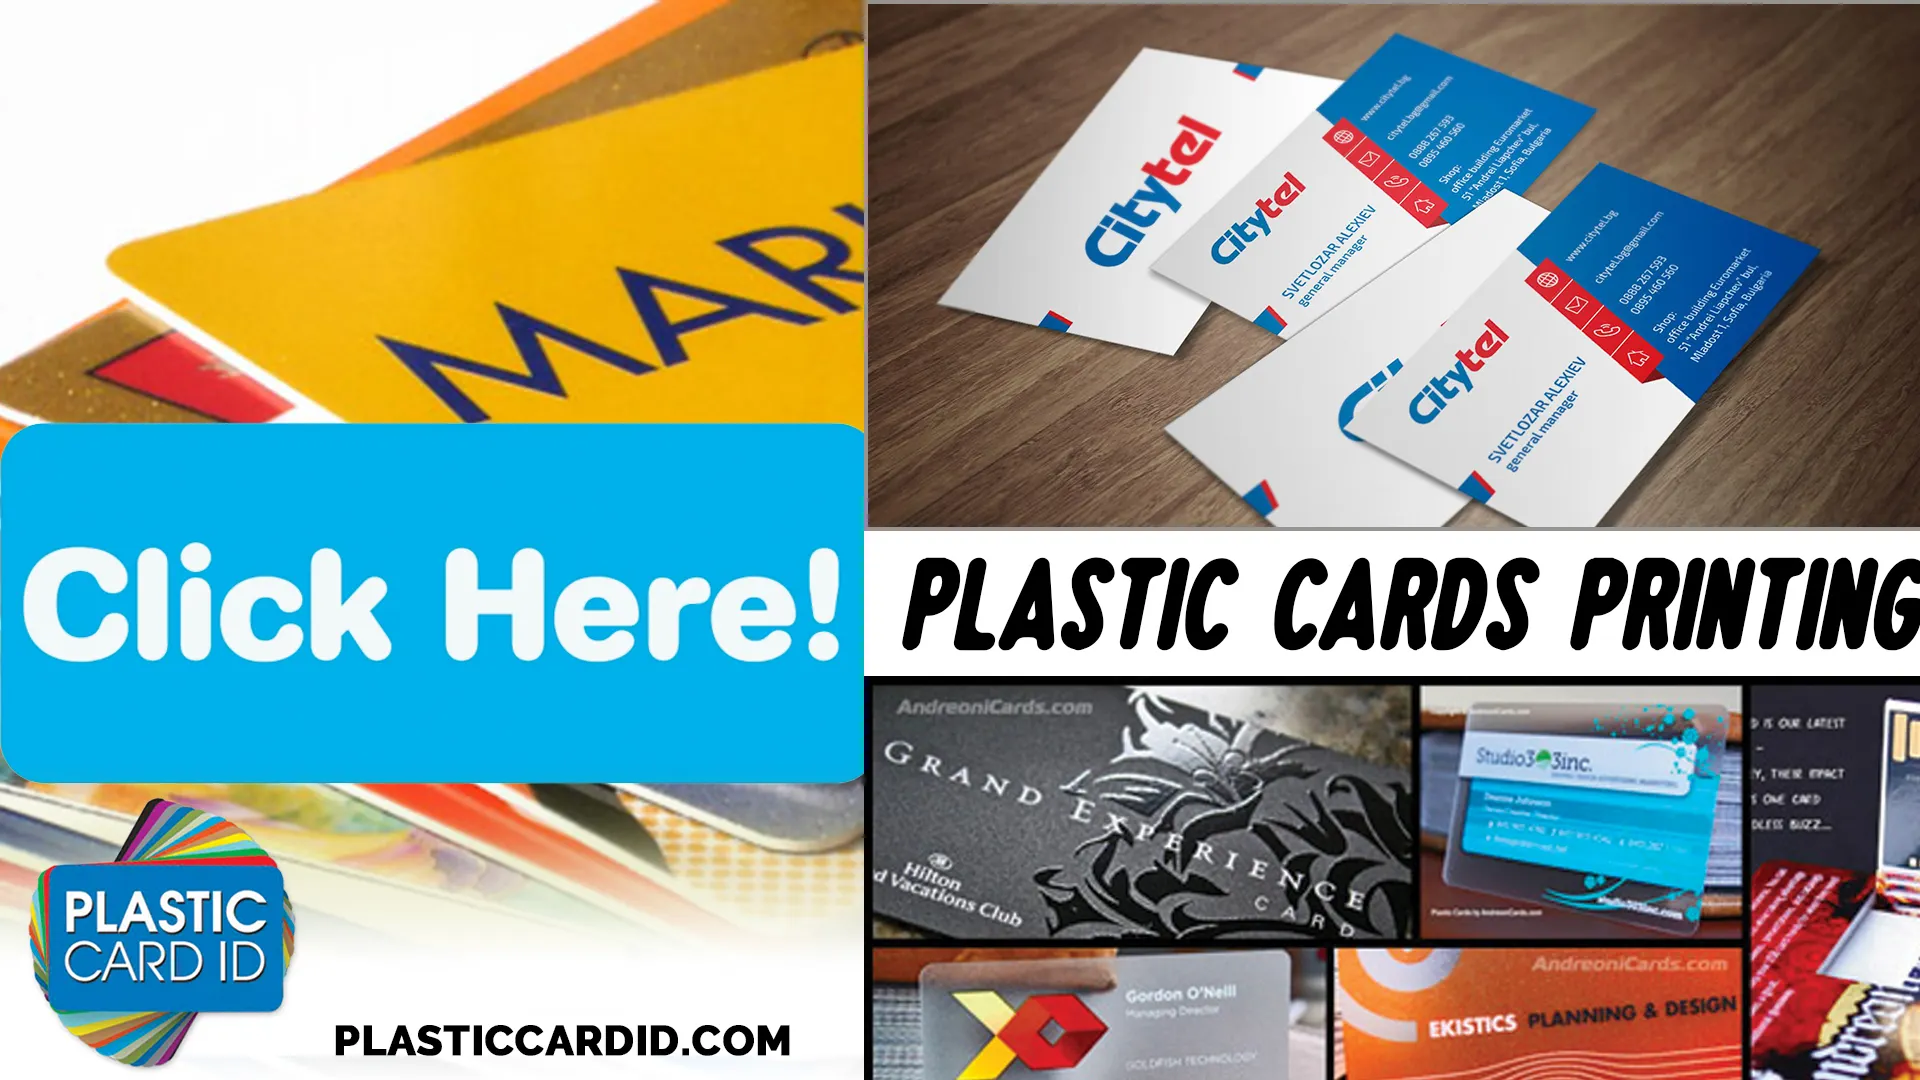 Custom Card Printing Tailored to Your Needs